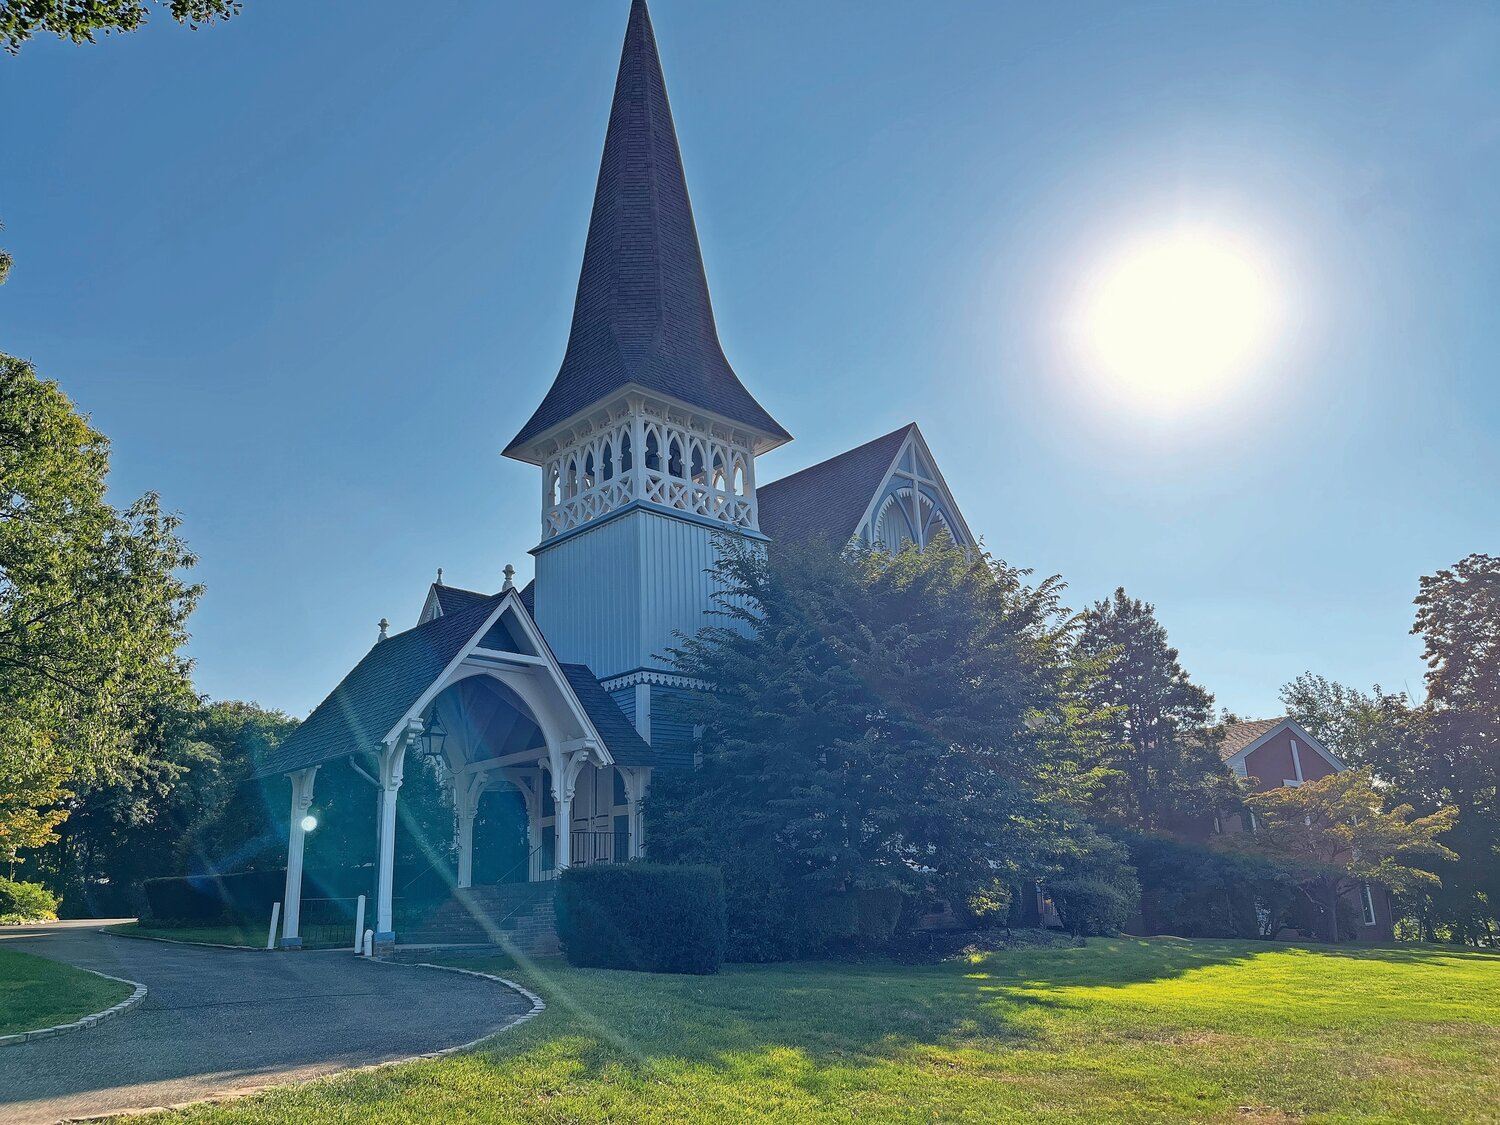 The church was built by a then little-known architect named J. Cleveland Cady, who would go on to design historic buildings like the American Museum of Natural History.